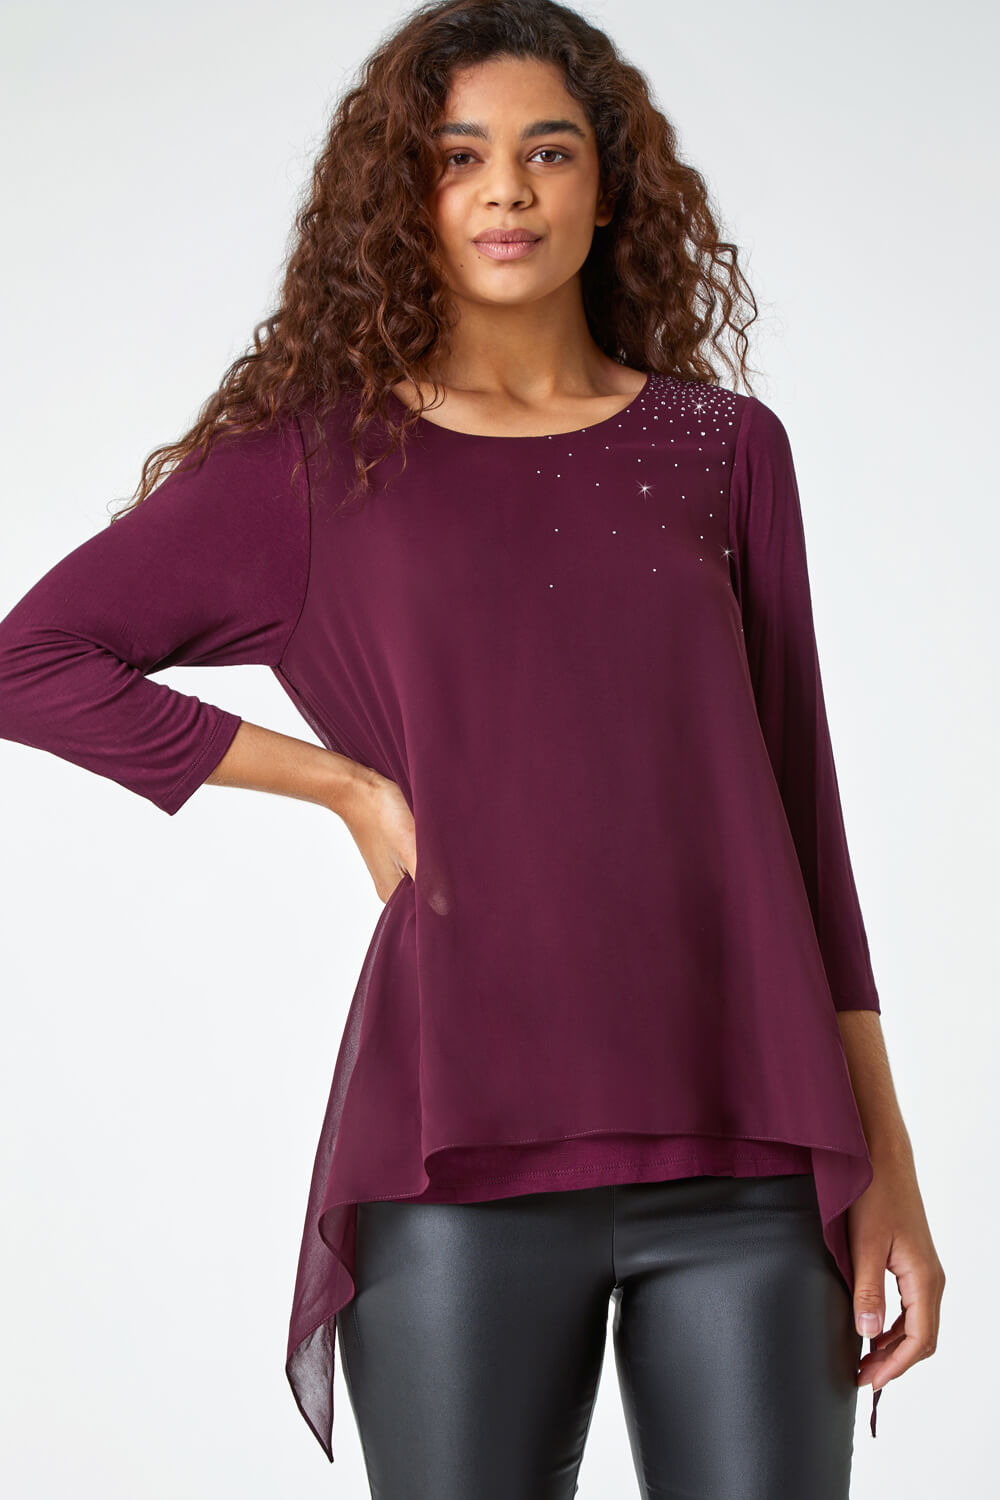 Cueply Plus Size Tops for Womens Summer Tops Dressy Causal Chiffon Blouses  Short Sleeve Crew Neck Shirts - Walmart.com